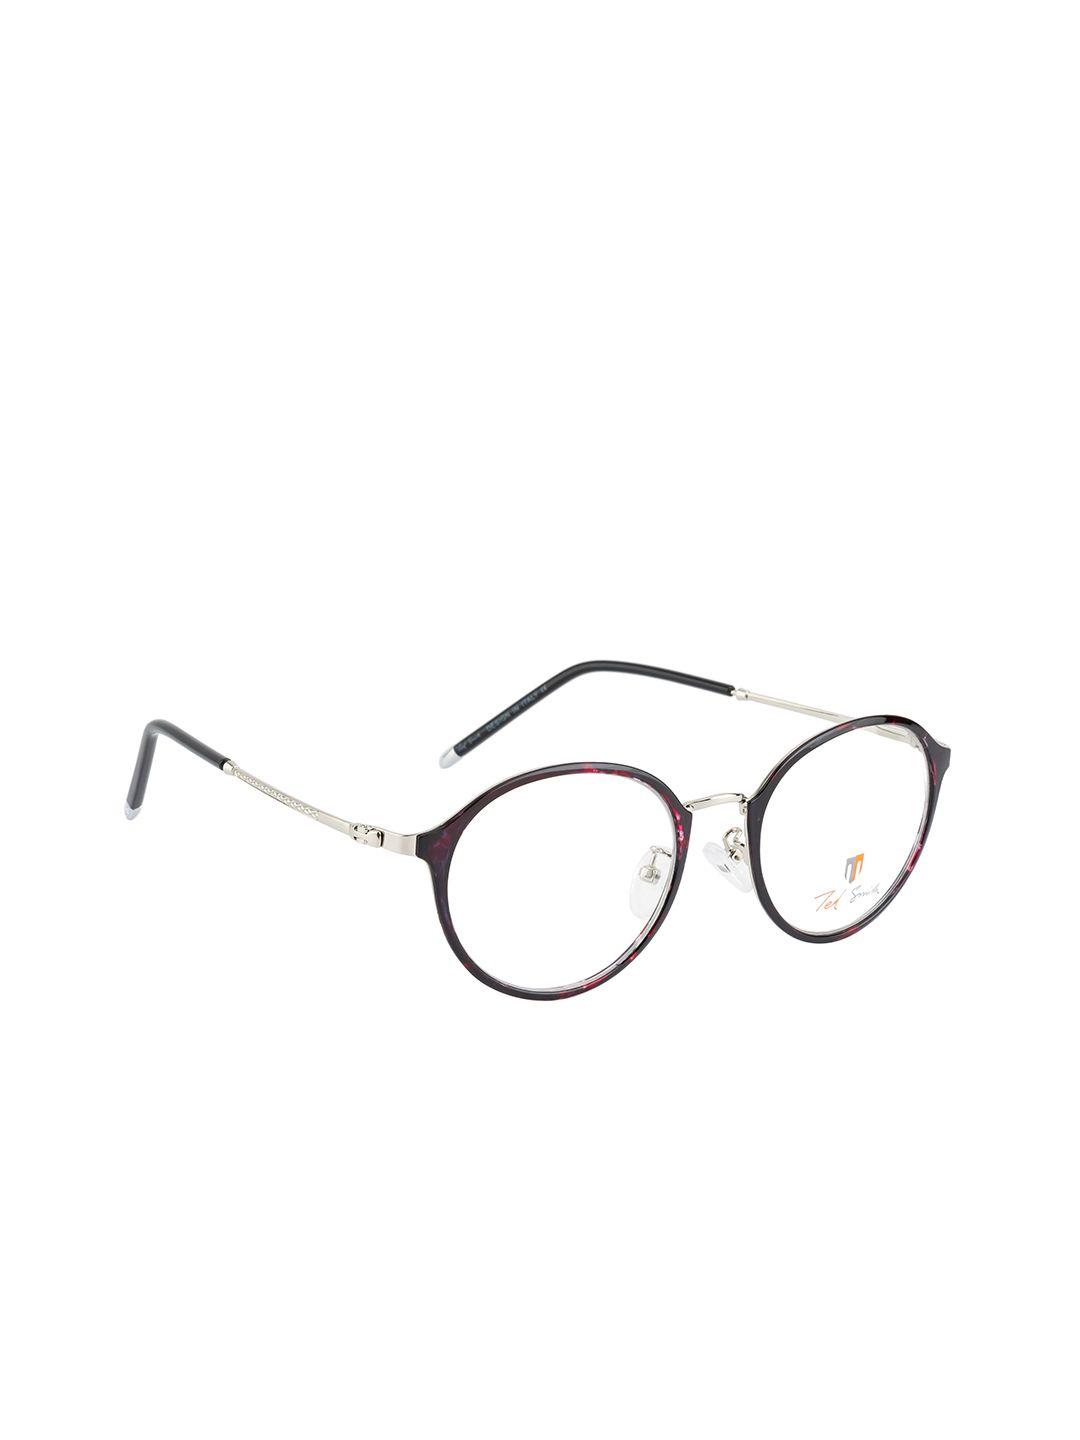 ted smith unisex silver-toned & maroon full rim round frames